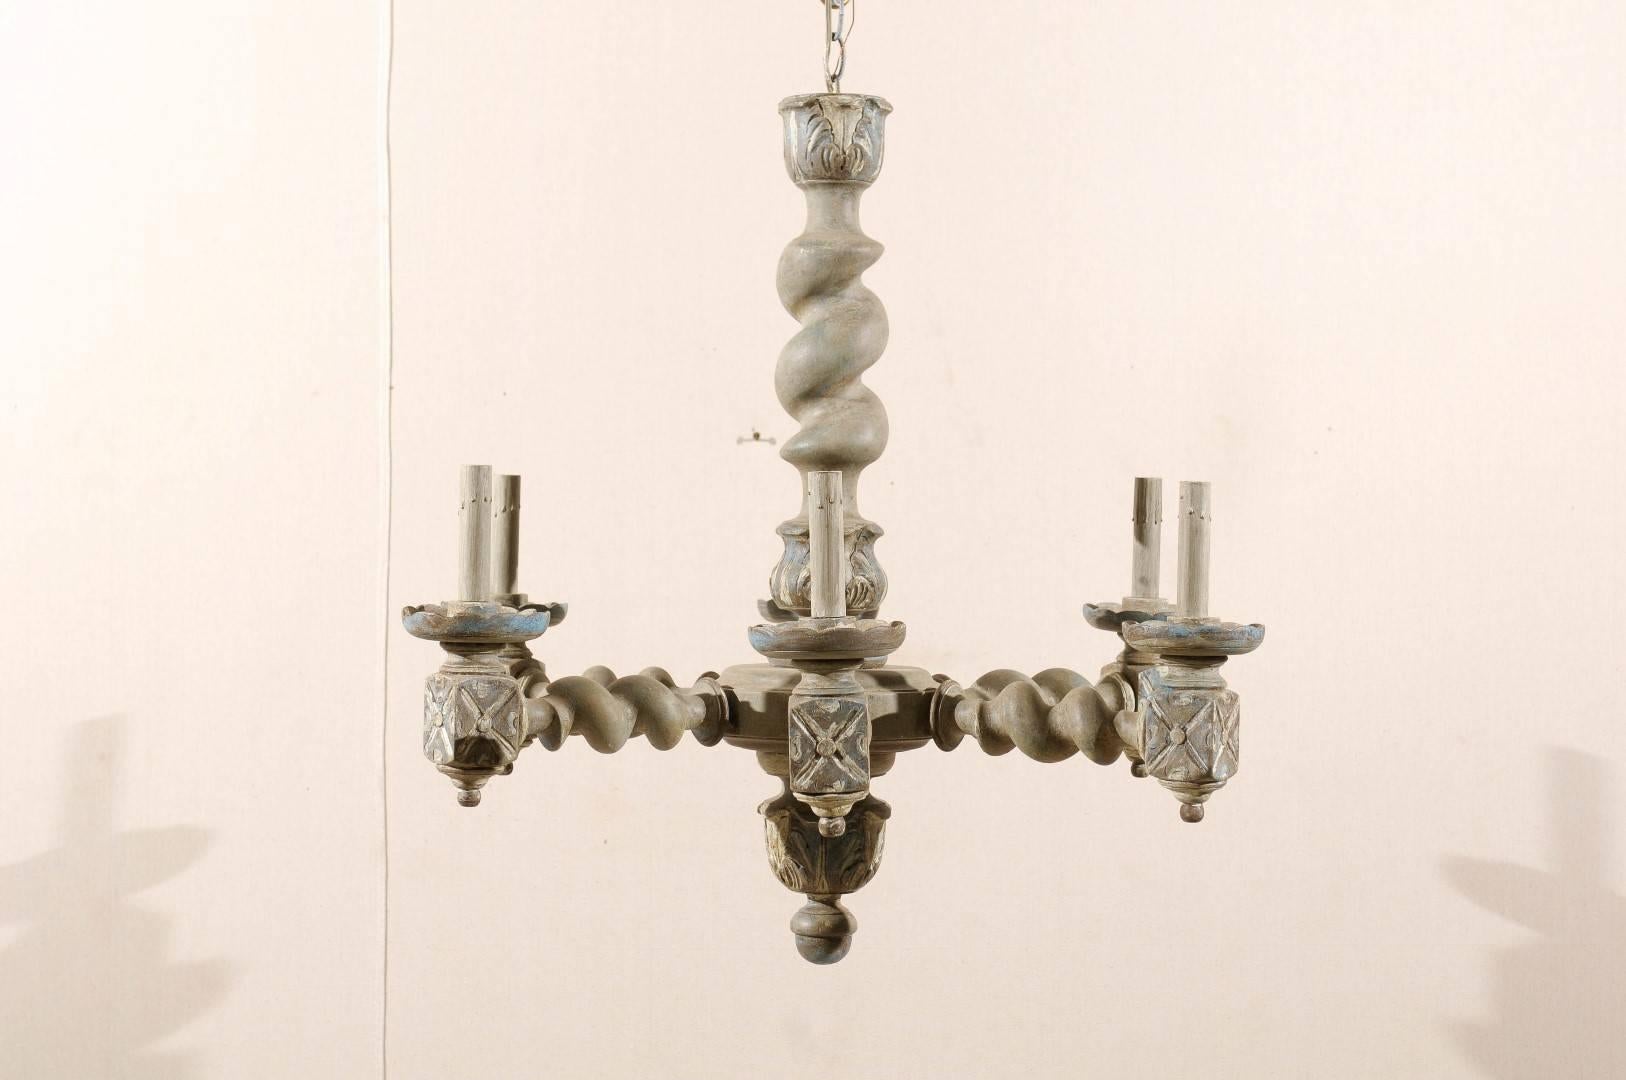 Carved French Six-Light Barley Twist Chandelier with Central Column and Acanthus Leaves